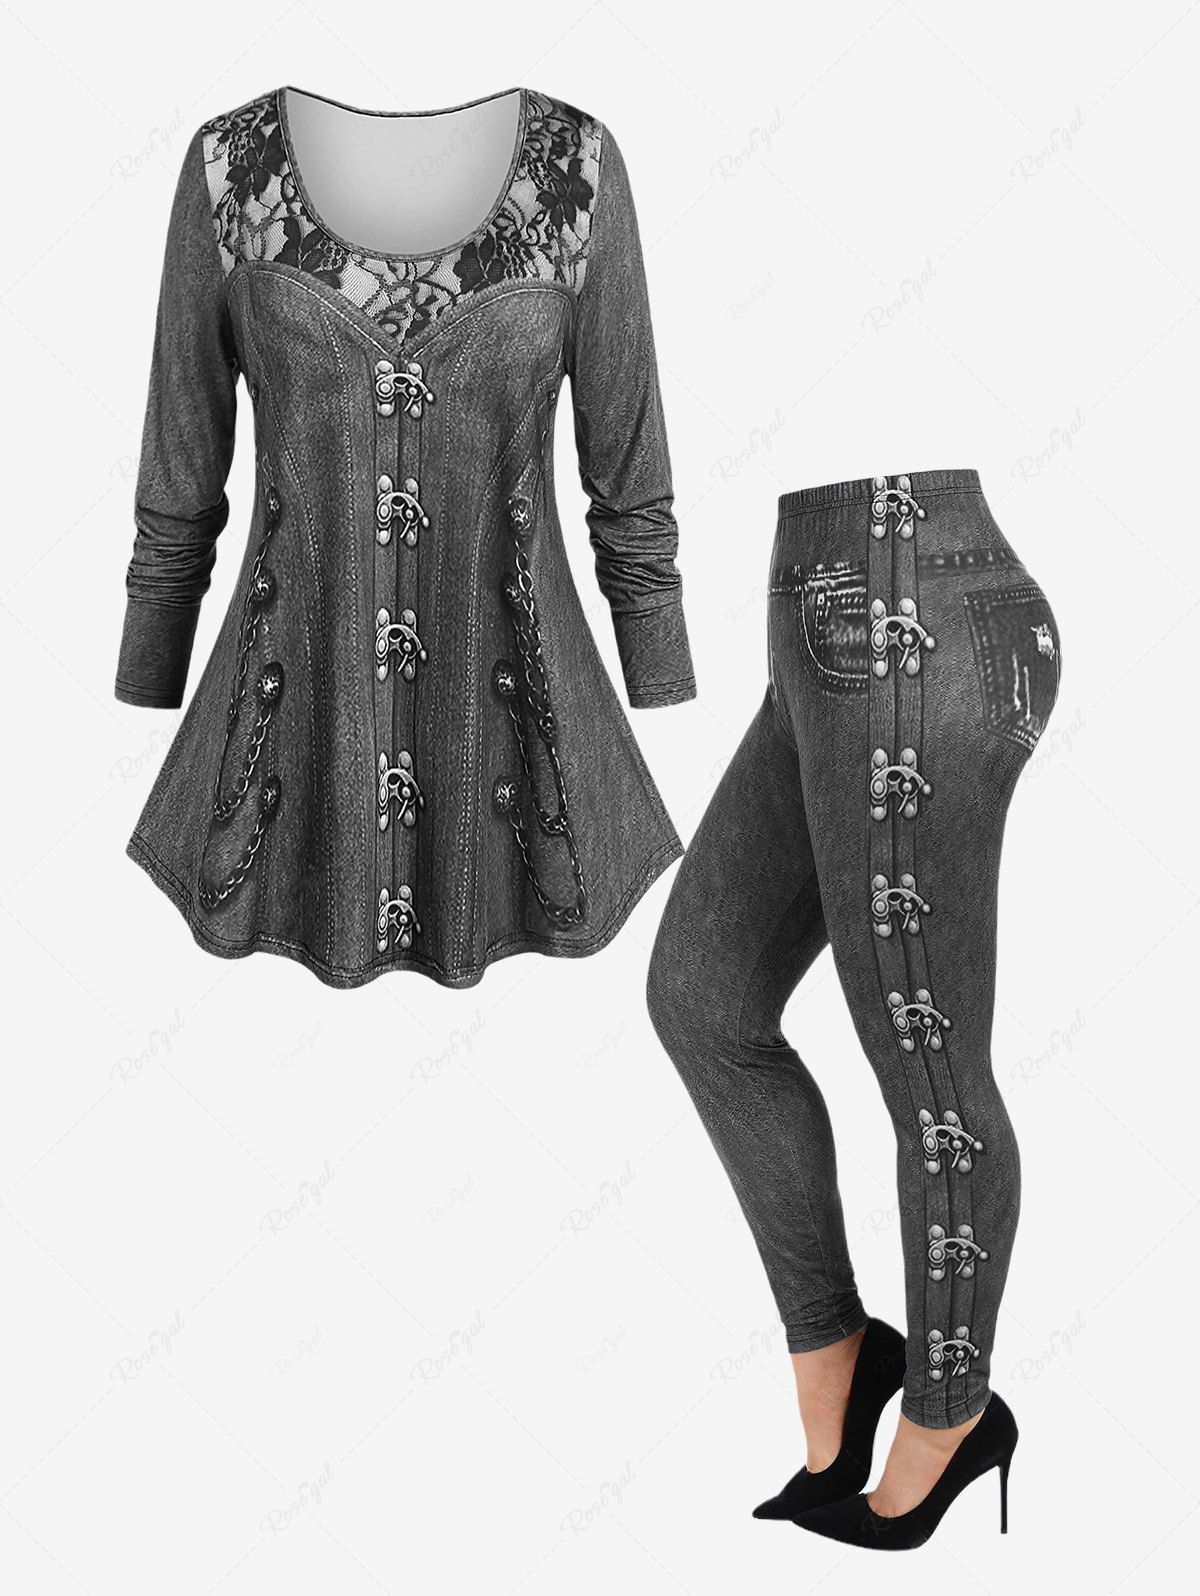 Shop Gothic 3D Jeans Chains Lace Printed Tee and Flocking Lined Leggings Outfit  